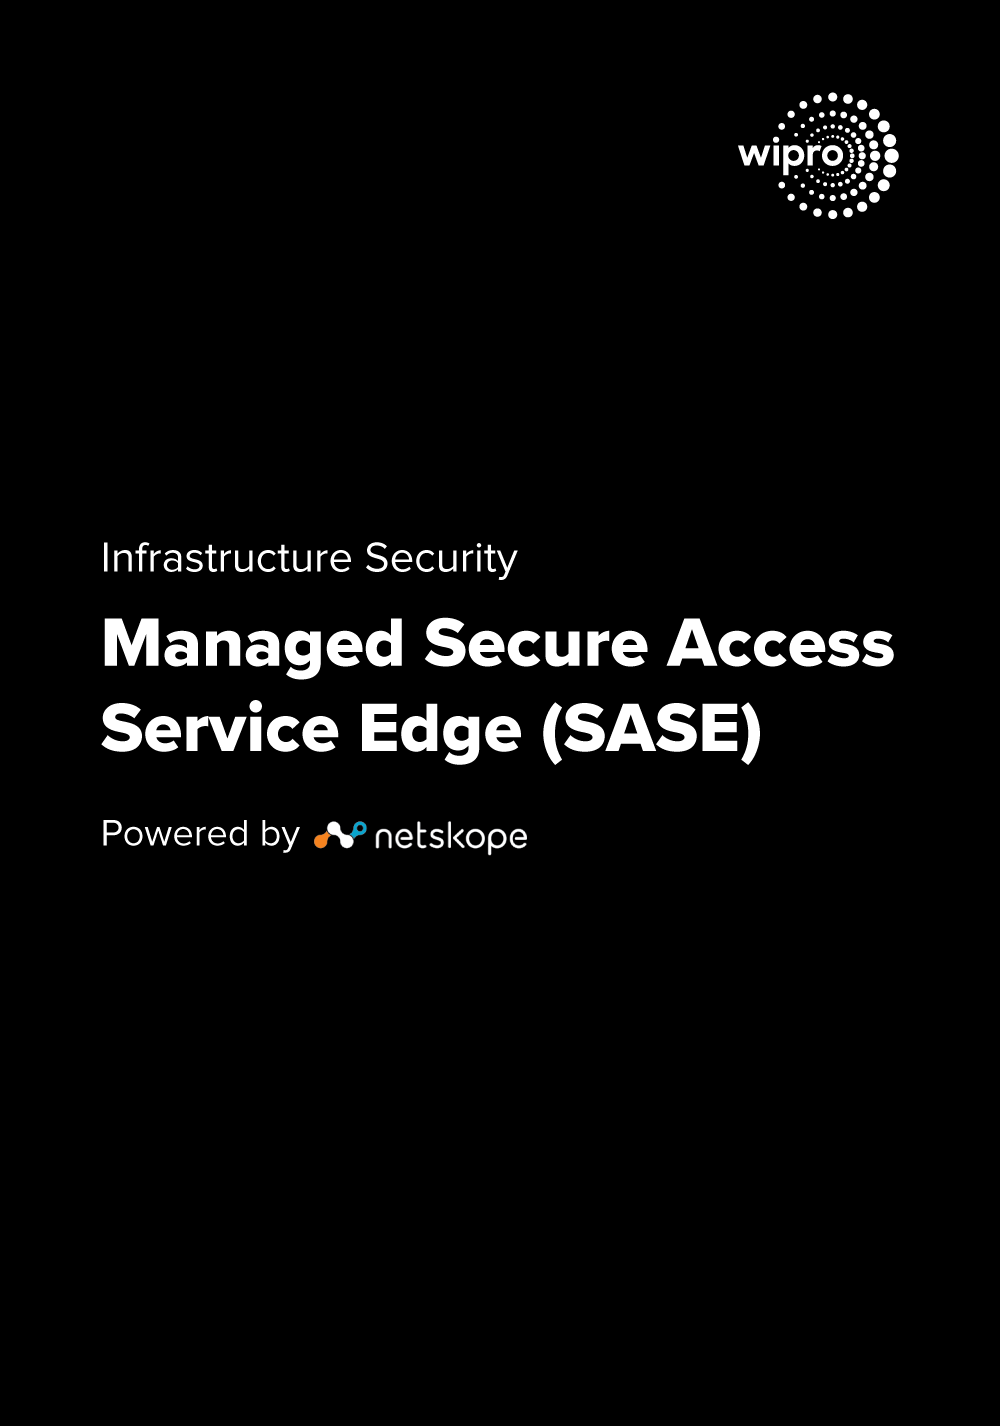 Wipro’s Managed Secure Access Service Edge (SASE) powered by Netskope